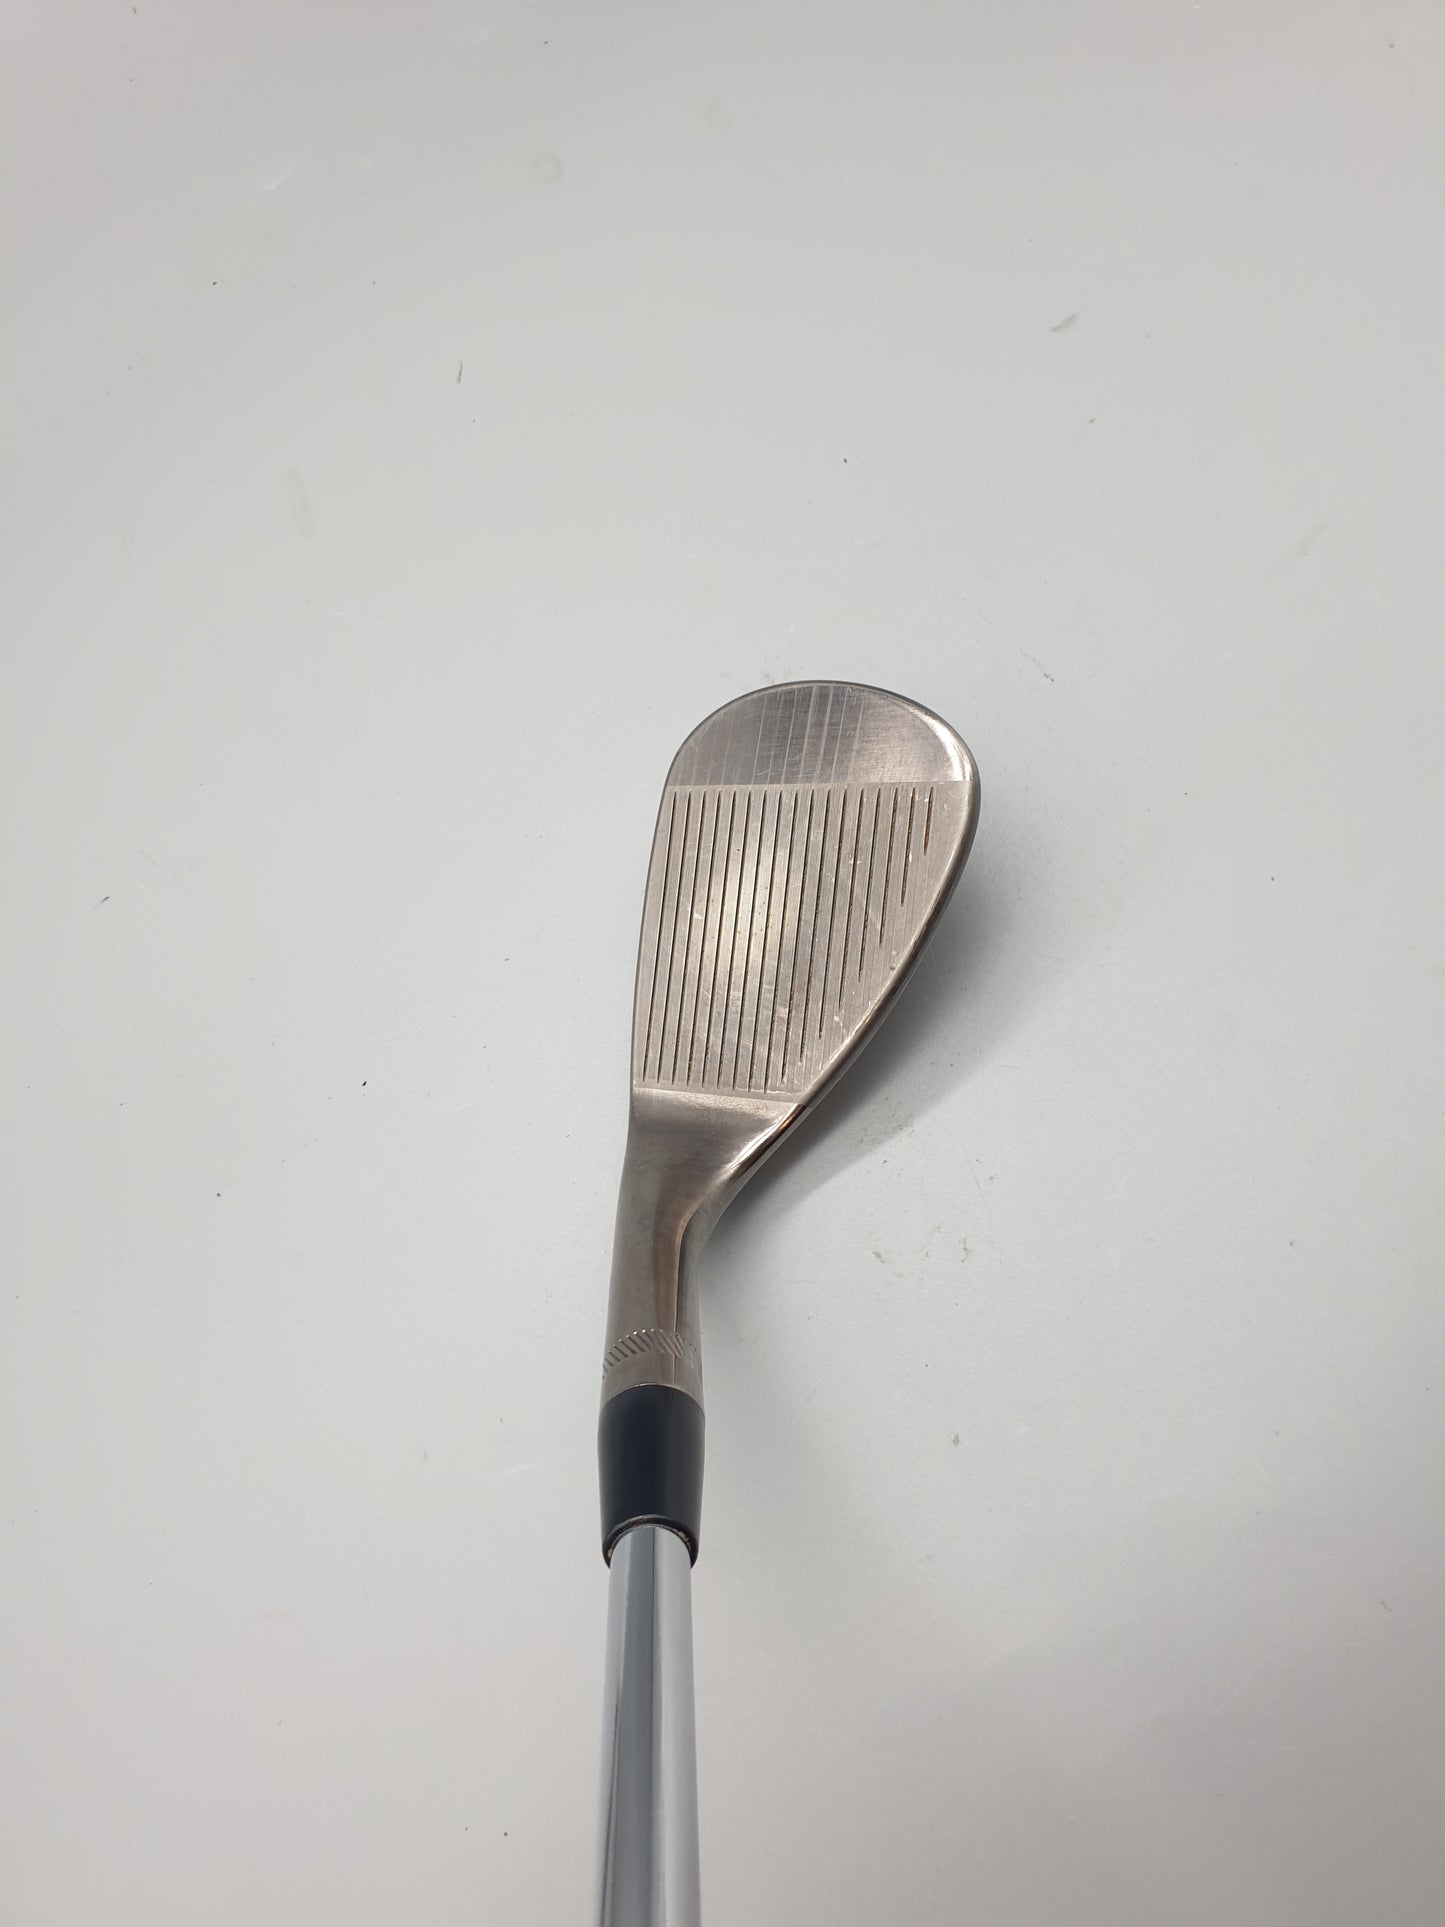 Titleist Vokey SM9 54.12D Brushed Steel Right Hand - USED